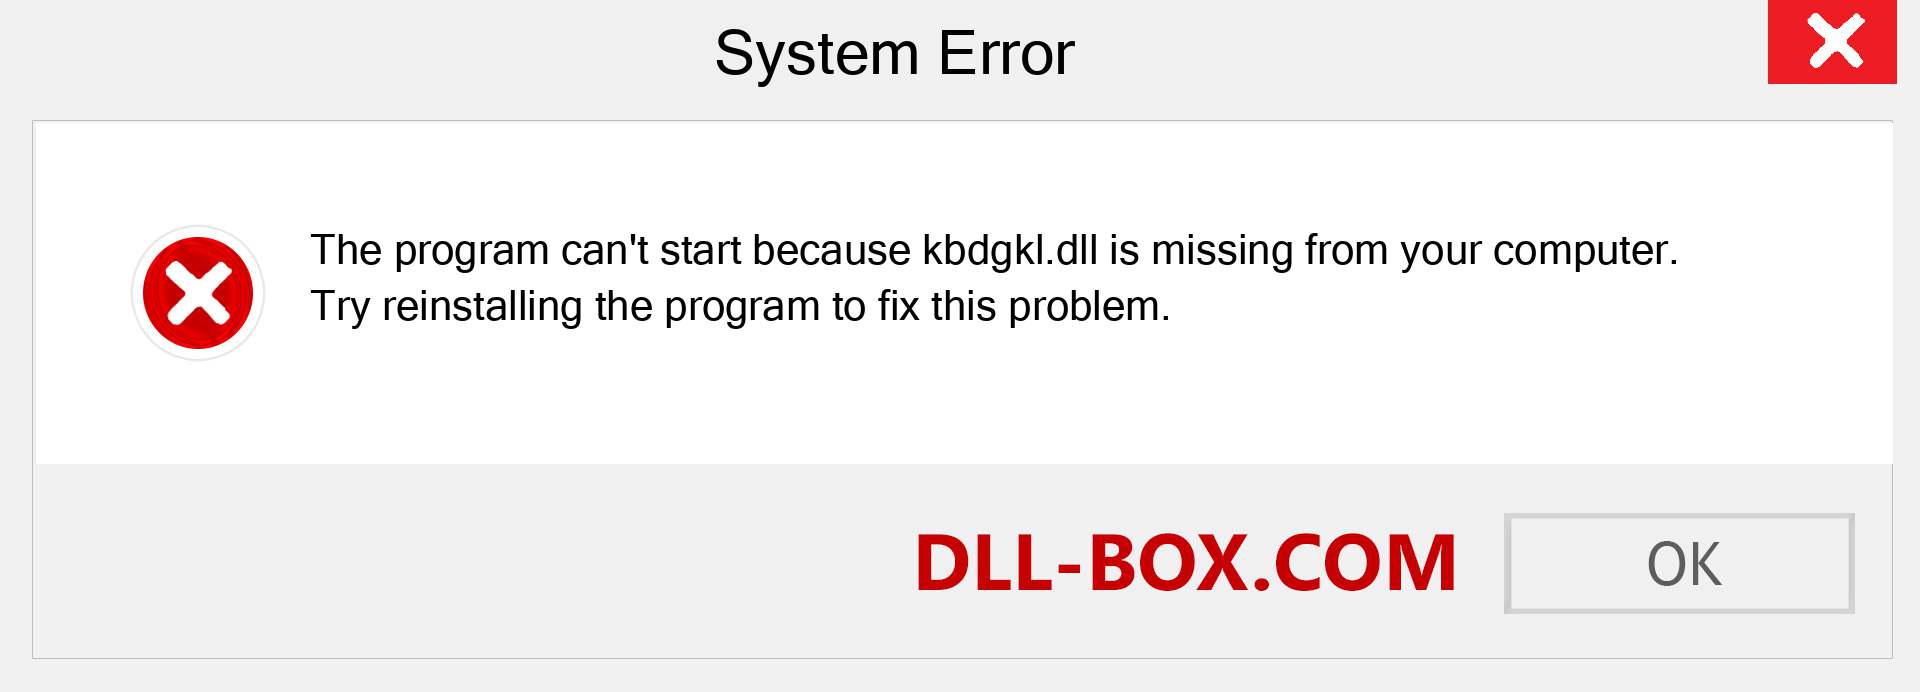  kbdgkl.dll file is missing?. Download for Windows 7, 8, 10 - Fix  kbdgkl dll Missing Error on Windows, photos, images